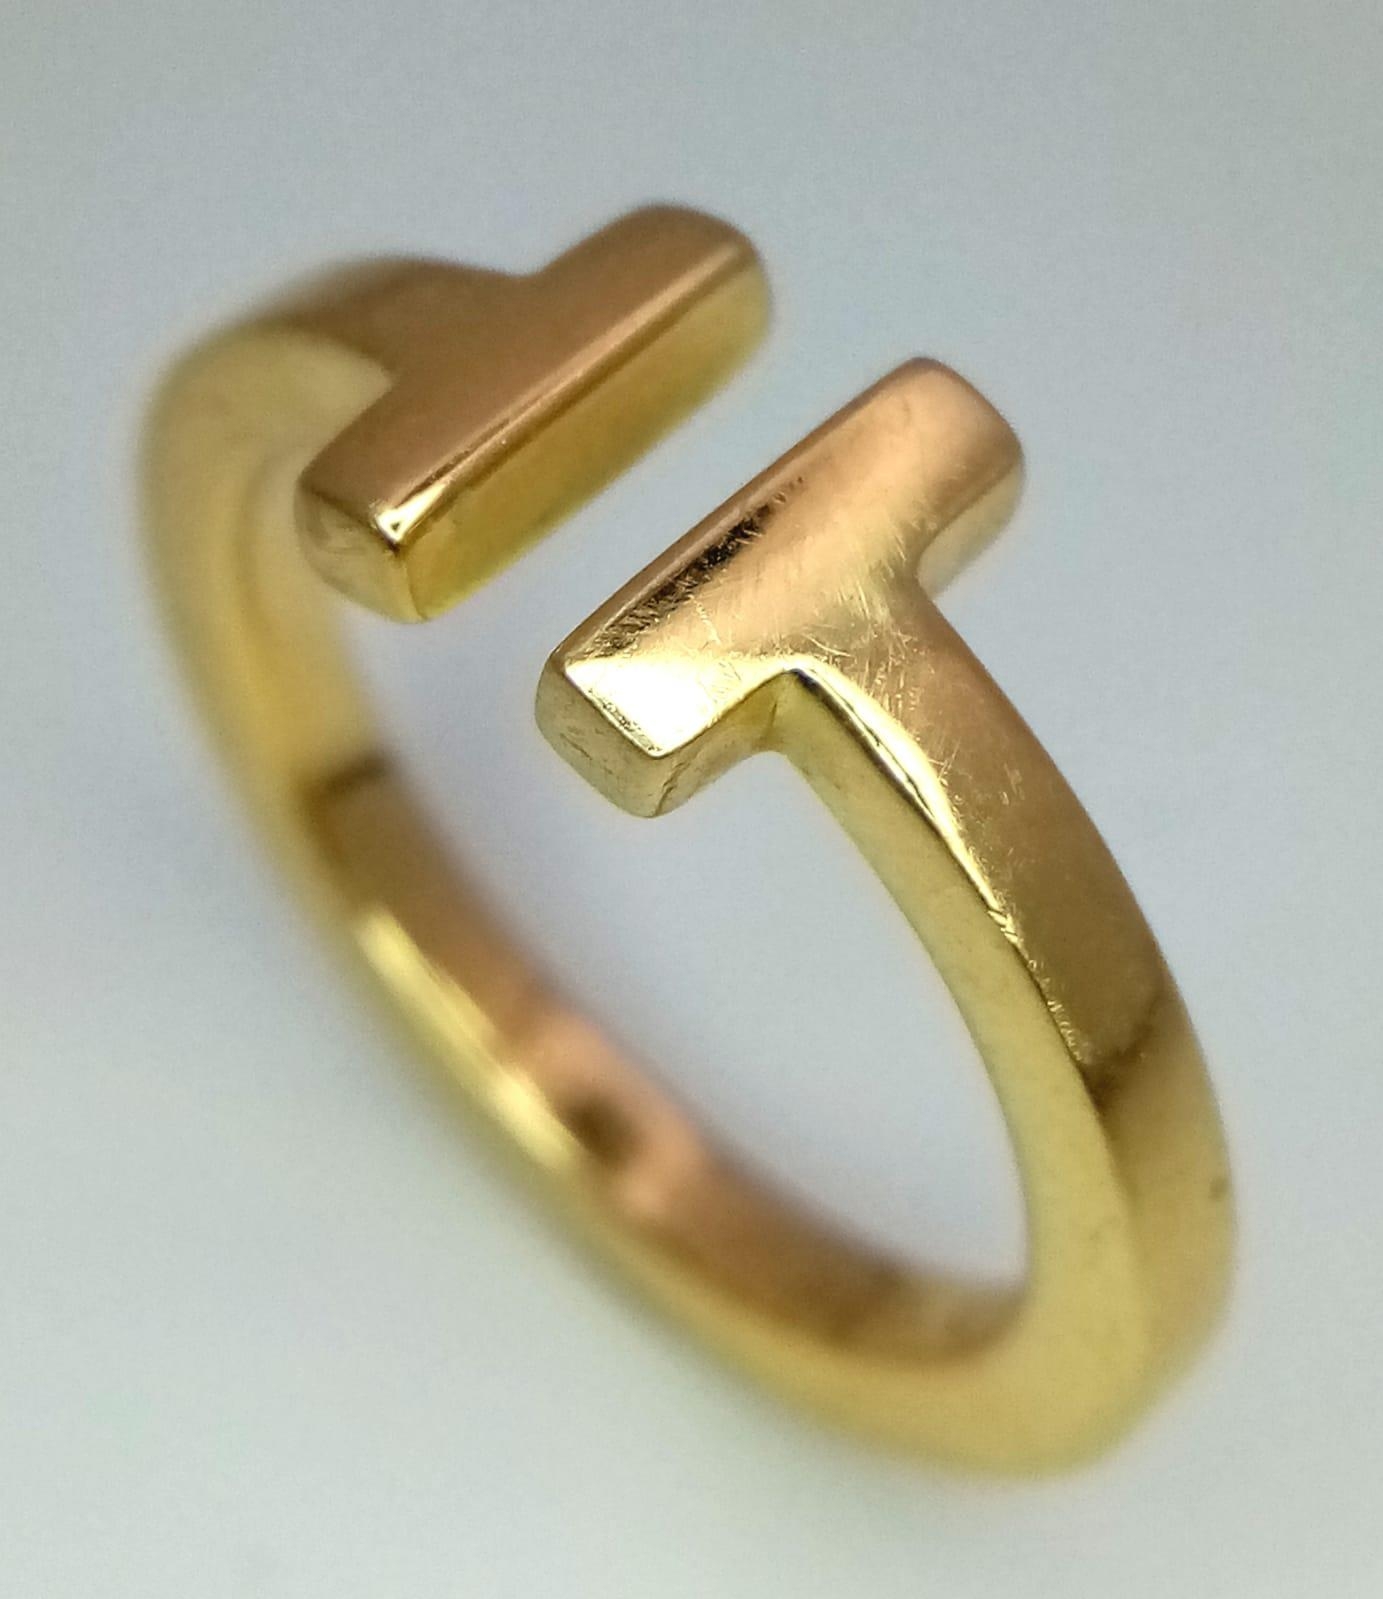 A TIFFANY & CO T SQUARE RING SET IN 18K YELLOW GOLD IN GOOD CONDITION, RRP £1900 SIZE N 5.8G - Image 2 of 5